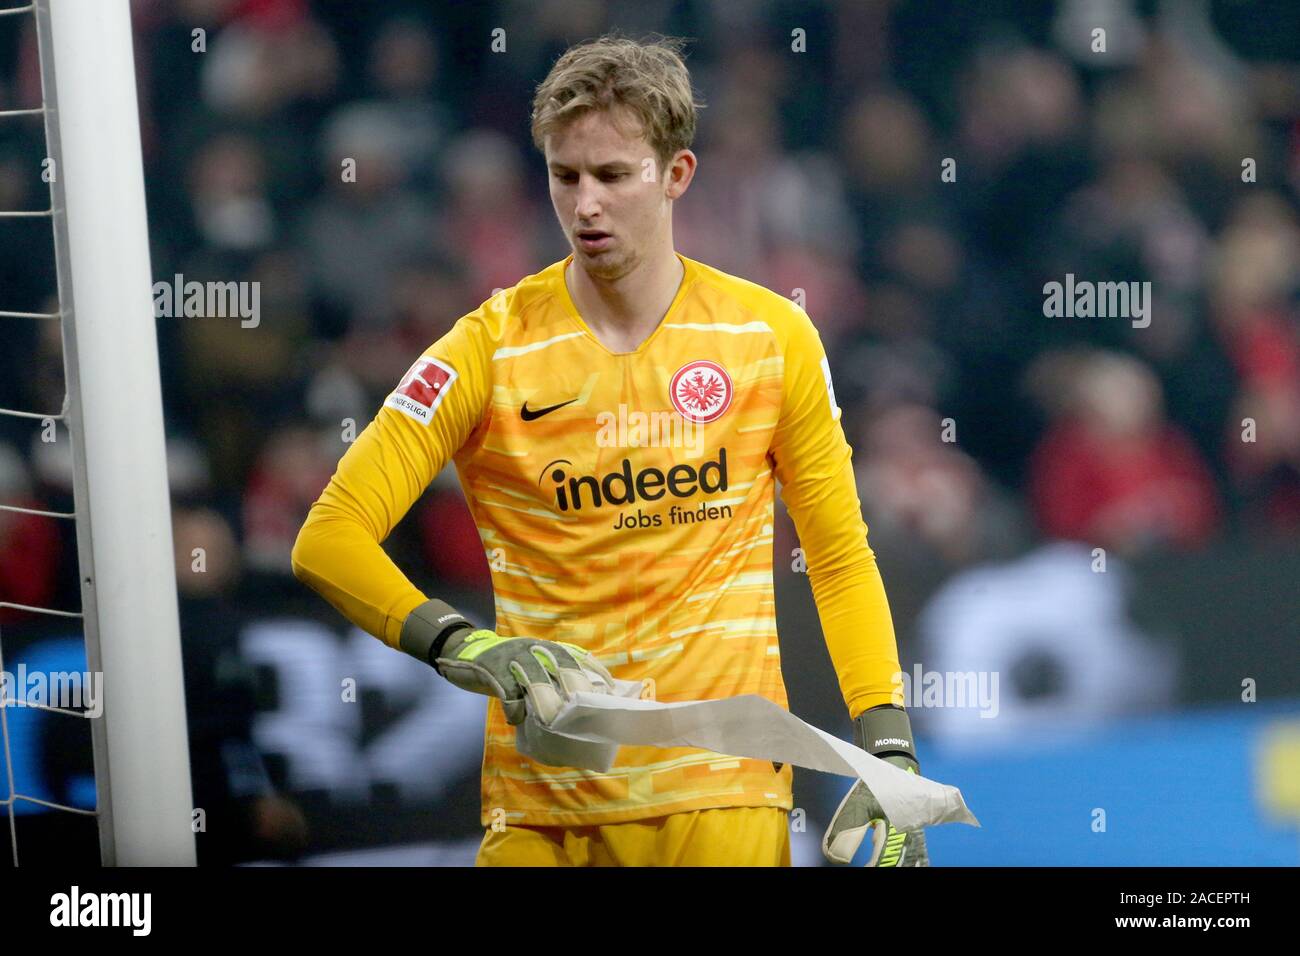 Mainz, Germany. 02nd Dec, 2019. Soccer: Bundesliga, FSV Mainz 05 - Eintracht Frankfurt, 13th matchday in the Opel Arena. Frankfurt goalkeeper Frederik Rönnow throws a roll of toilet paper off the field. Credit: Thomas Frey/dpa - IMPORTANT NOTE: In accordance with the requirements of the DFL Deutsche Fußball Liga or the DFB Deutscher Fußball-Bund, it is prohibited to use or have used photographs taken in the stadium and/or the match in the form of sequence images and/or video-like photo sequences./dpa/Alamy Live News Stock Photo